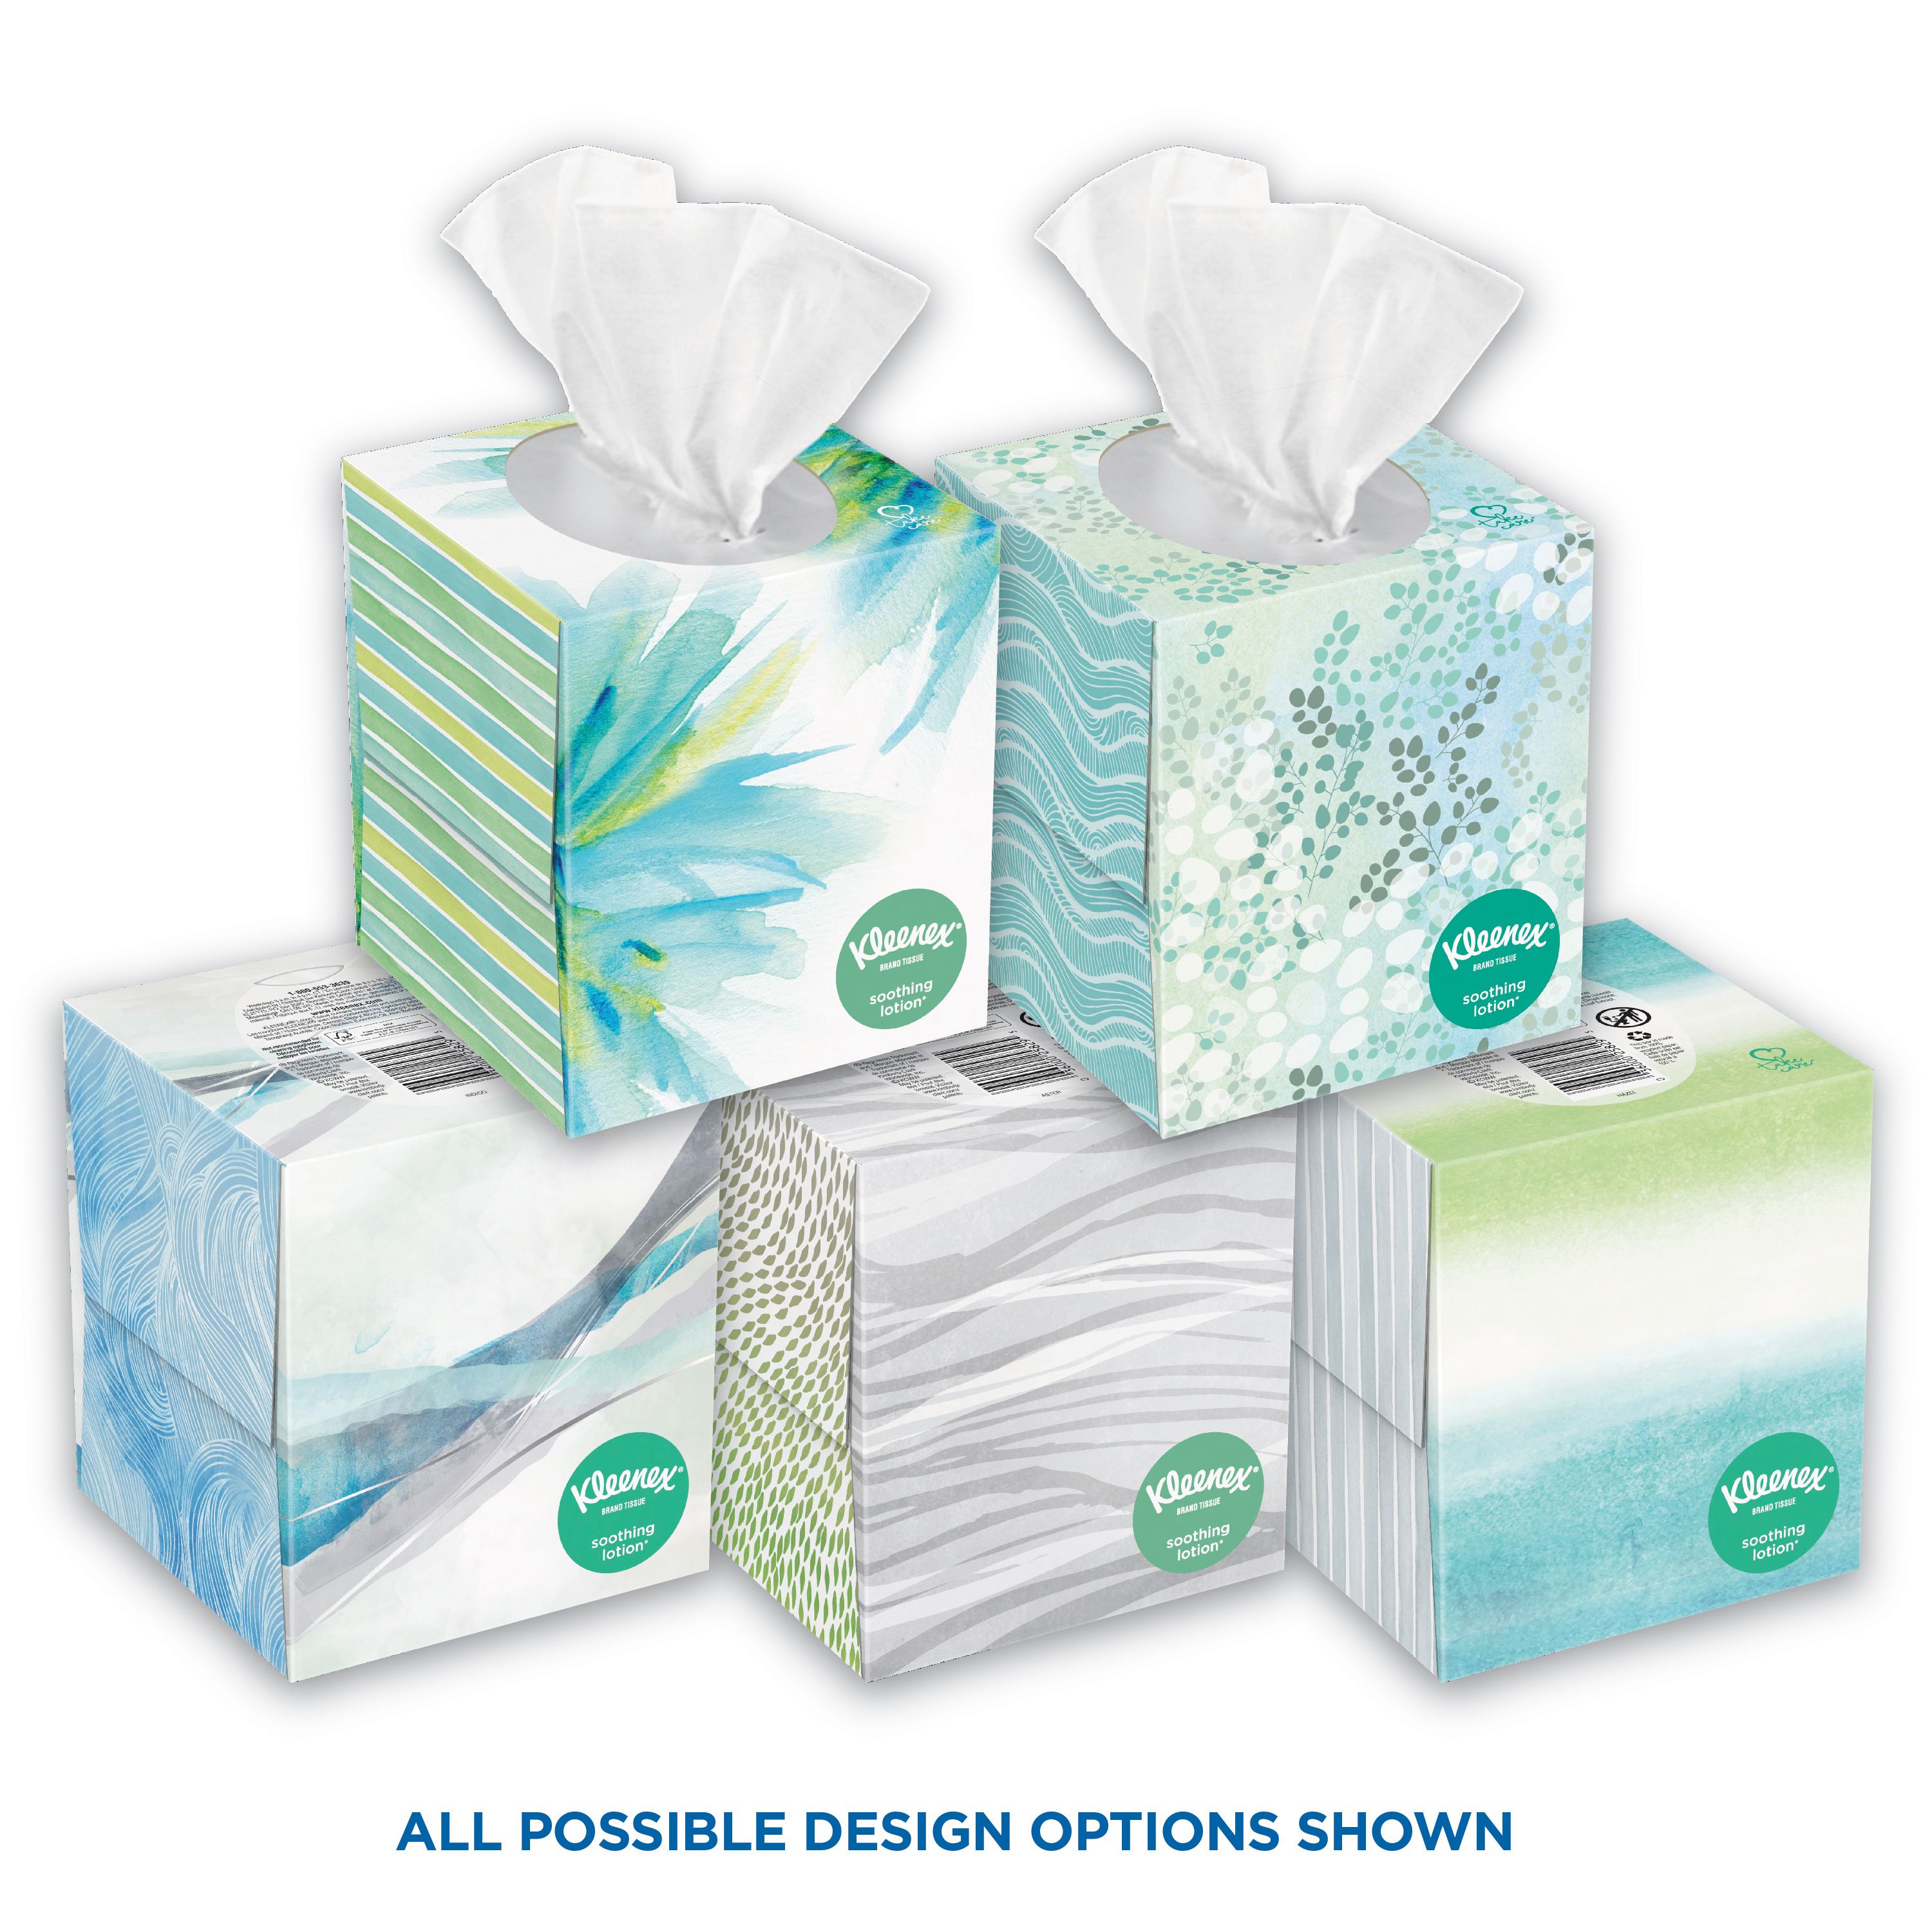 Kleenex Soothing Lotion Facial Tissues, 4 Cube Boxes, 75 White Tissues per Box, 3-Ply (300 Total Tissues) - image 2 of 4